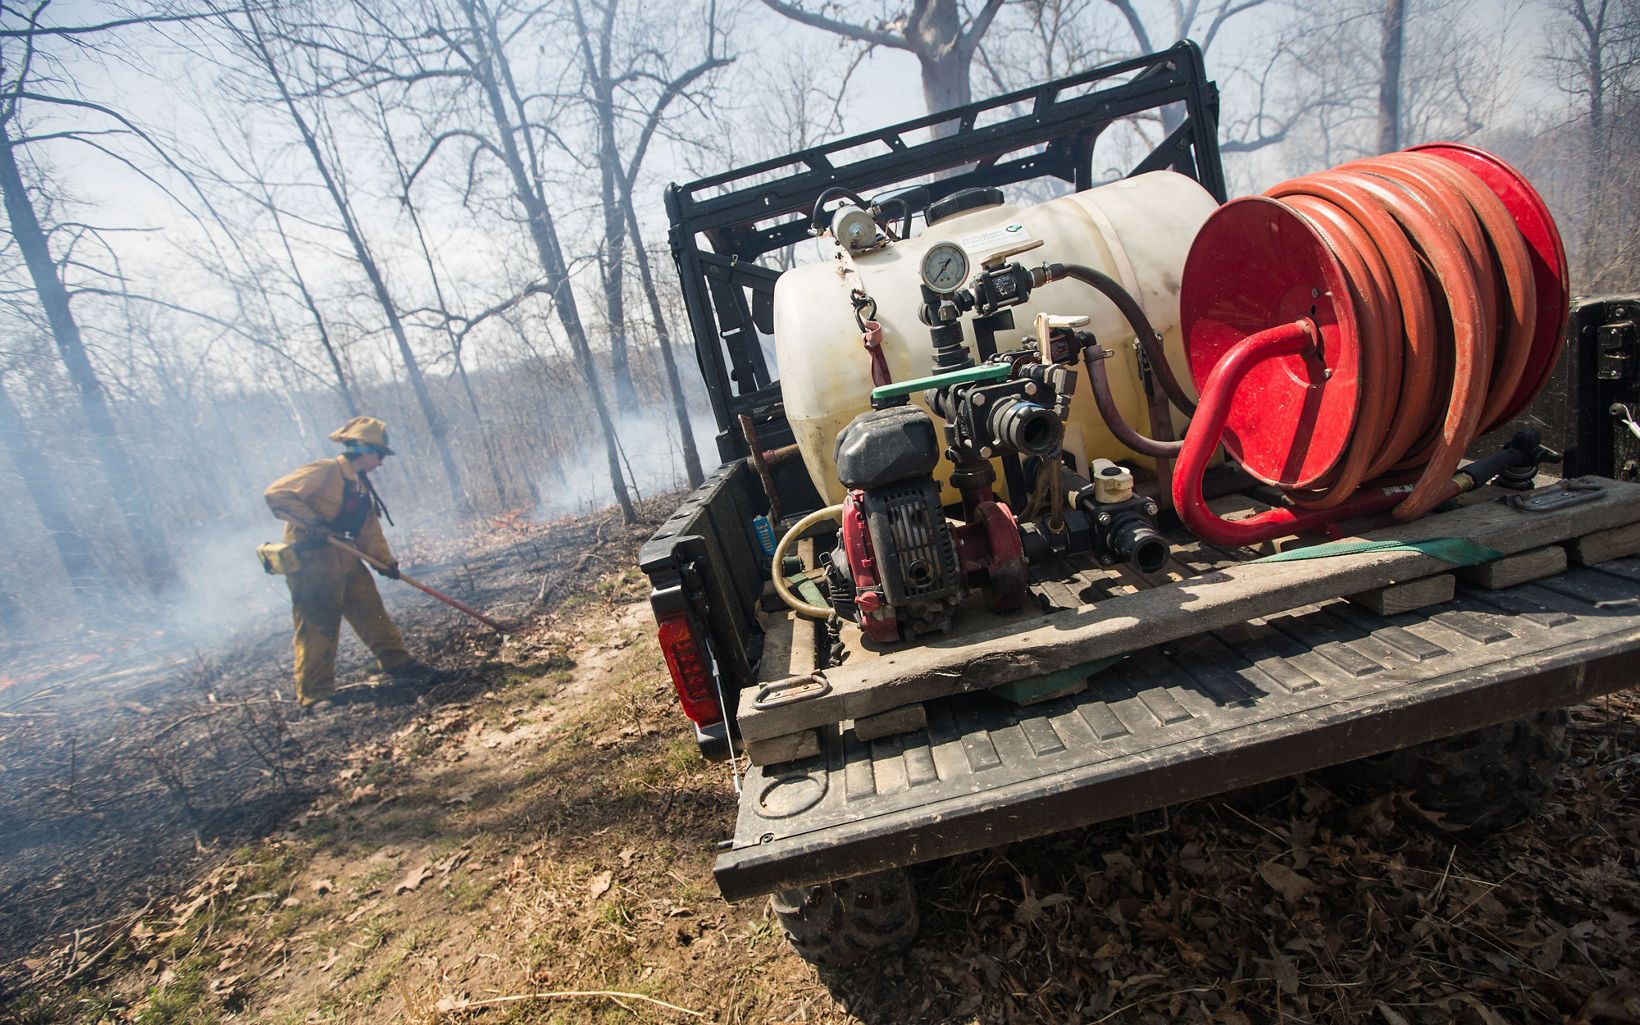 Kentucky Fire Management  A member of the fire crew “mops up” at the end of the prescribed burn.  © Mike Wilkinson